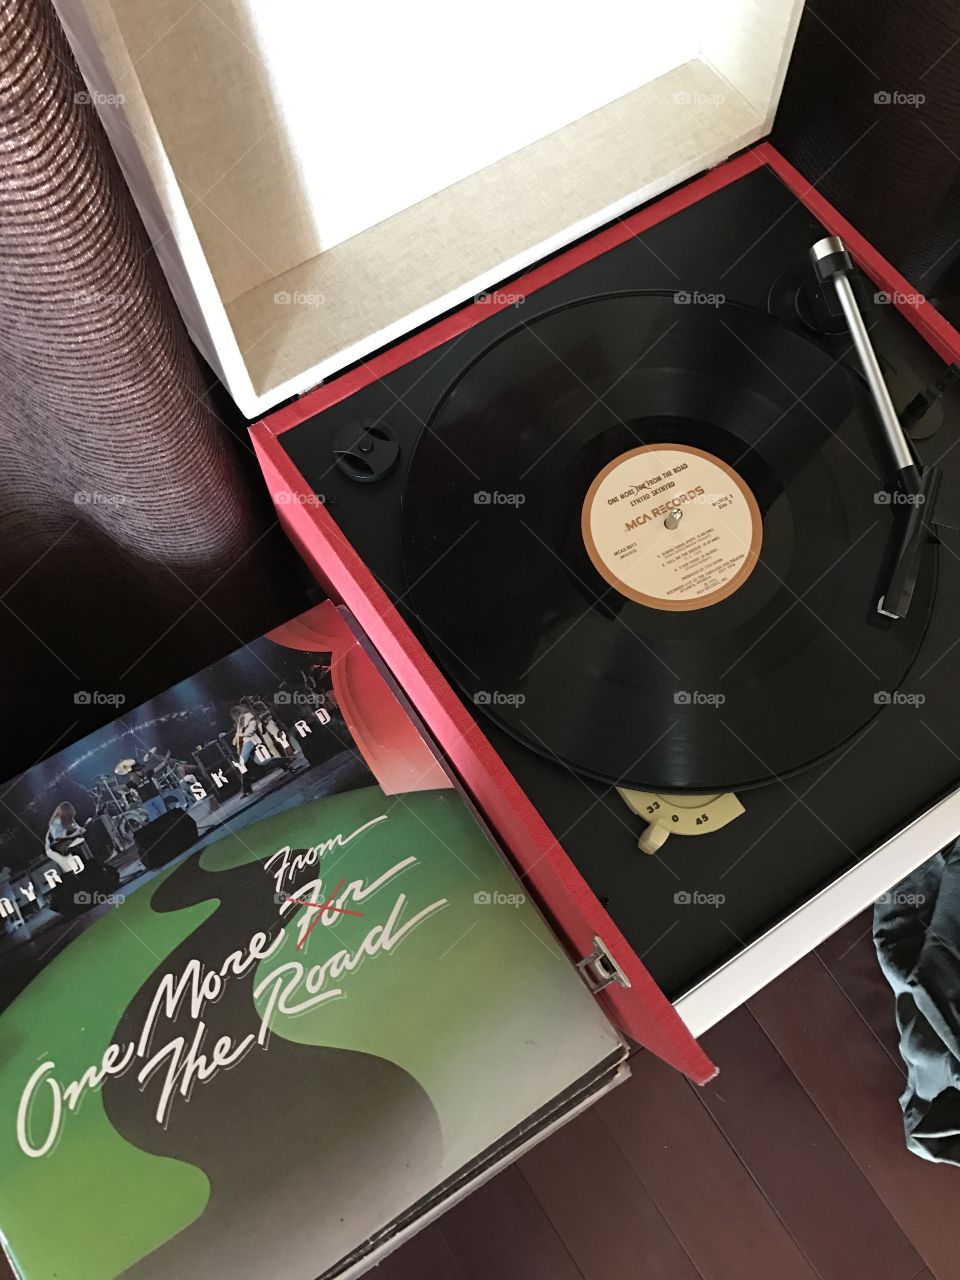 Listening to classic music on the record player!